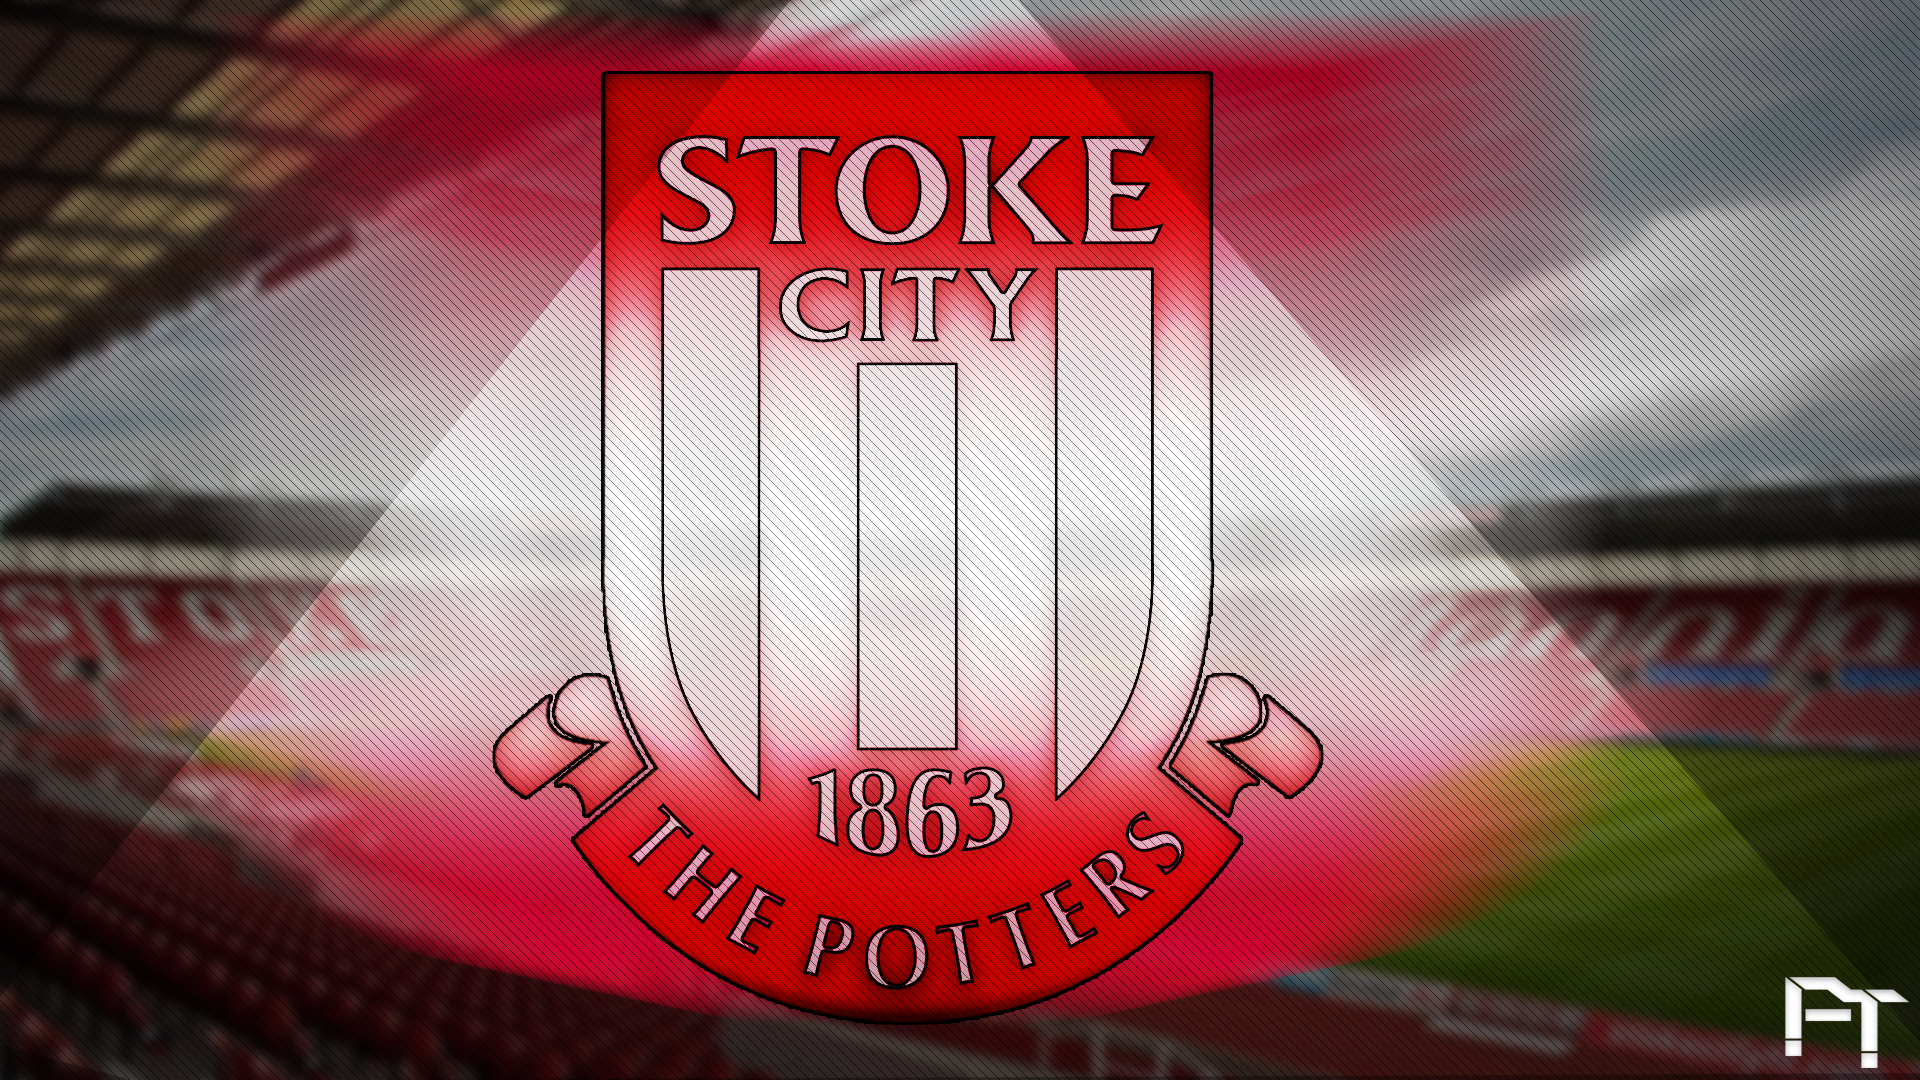 Stoke City Fc Wallpaper HD Full Pictures